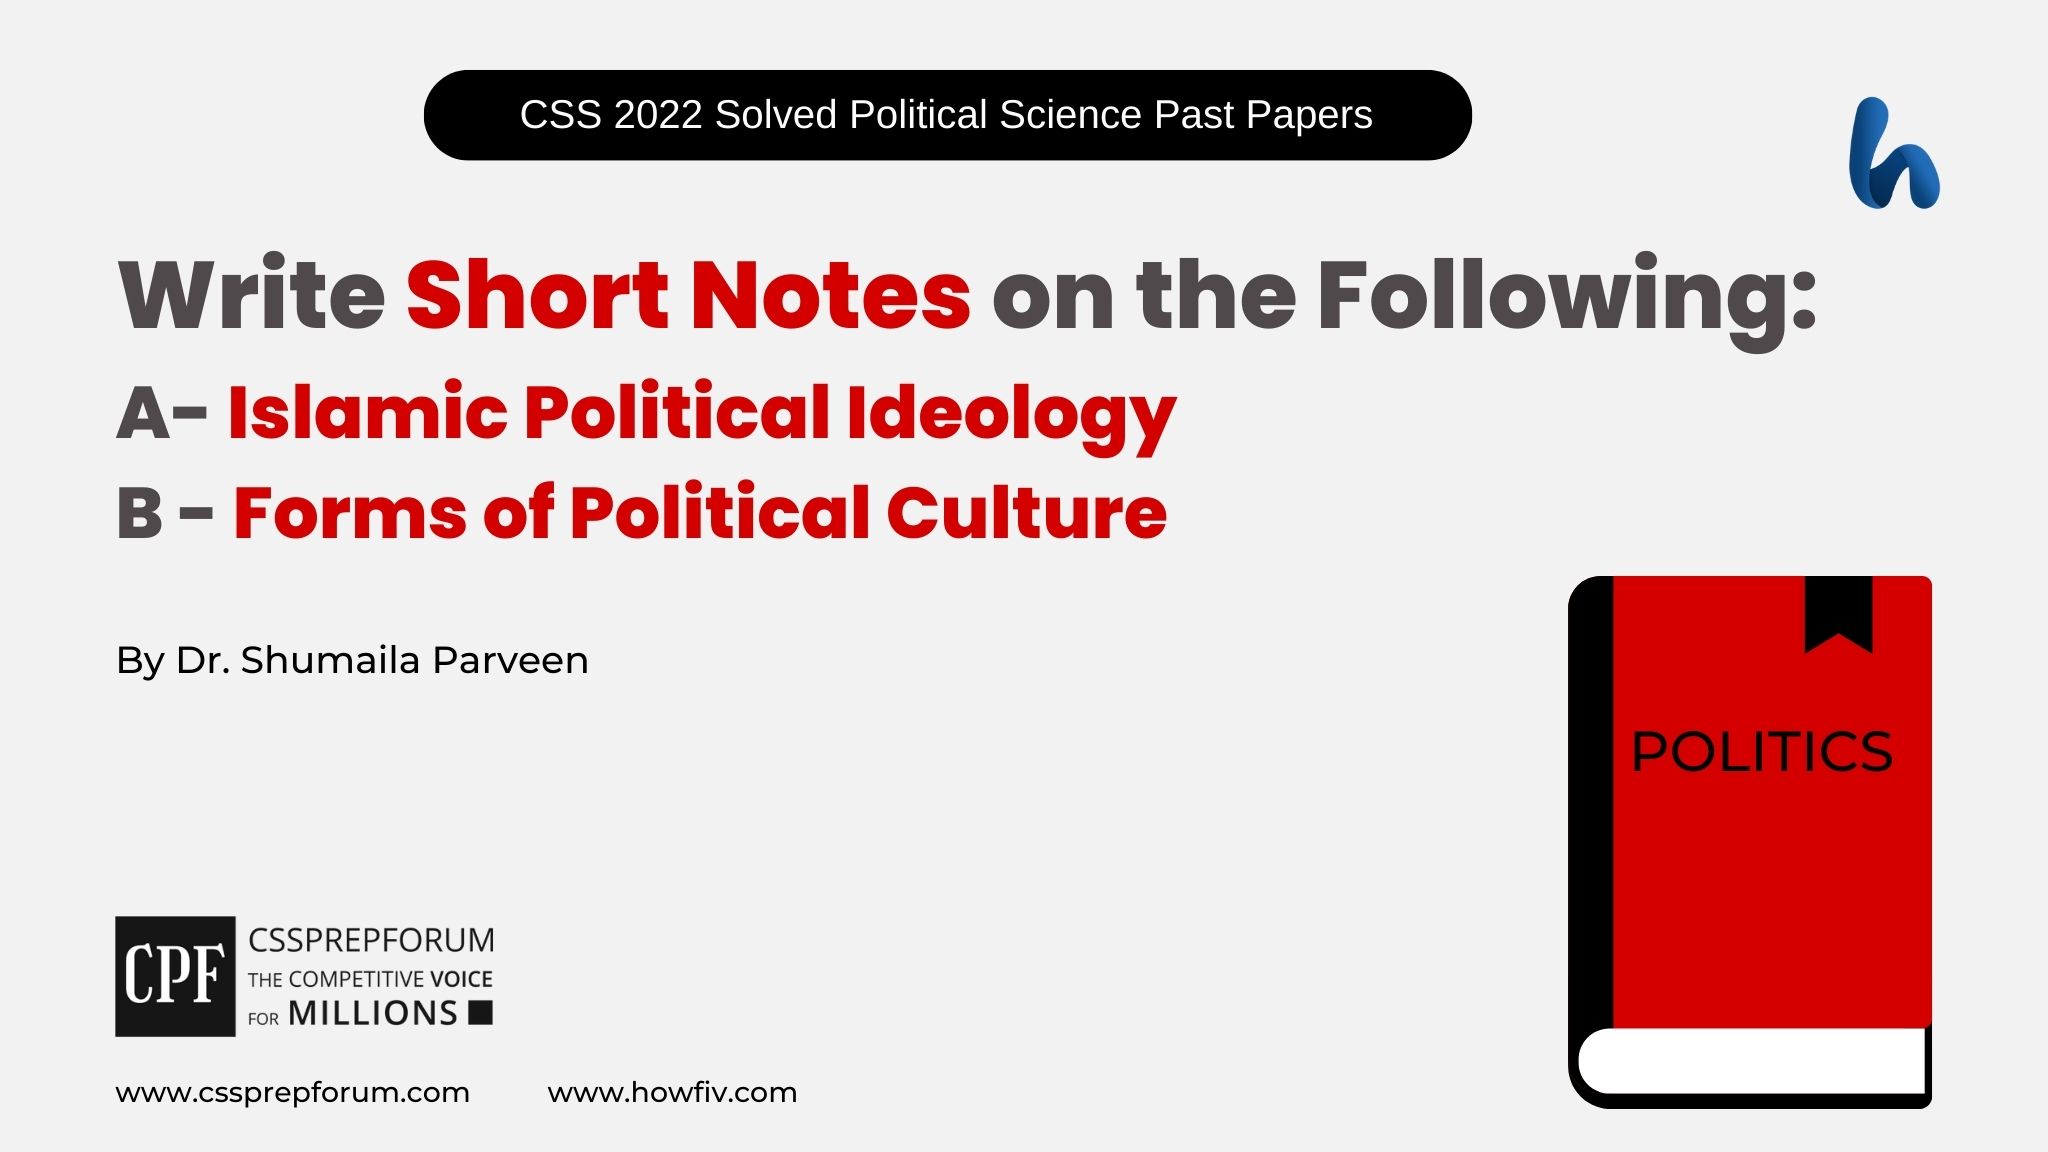 Islamic Political Ideology and Political Culture Forms By Dr. Shumaila Parveen